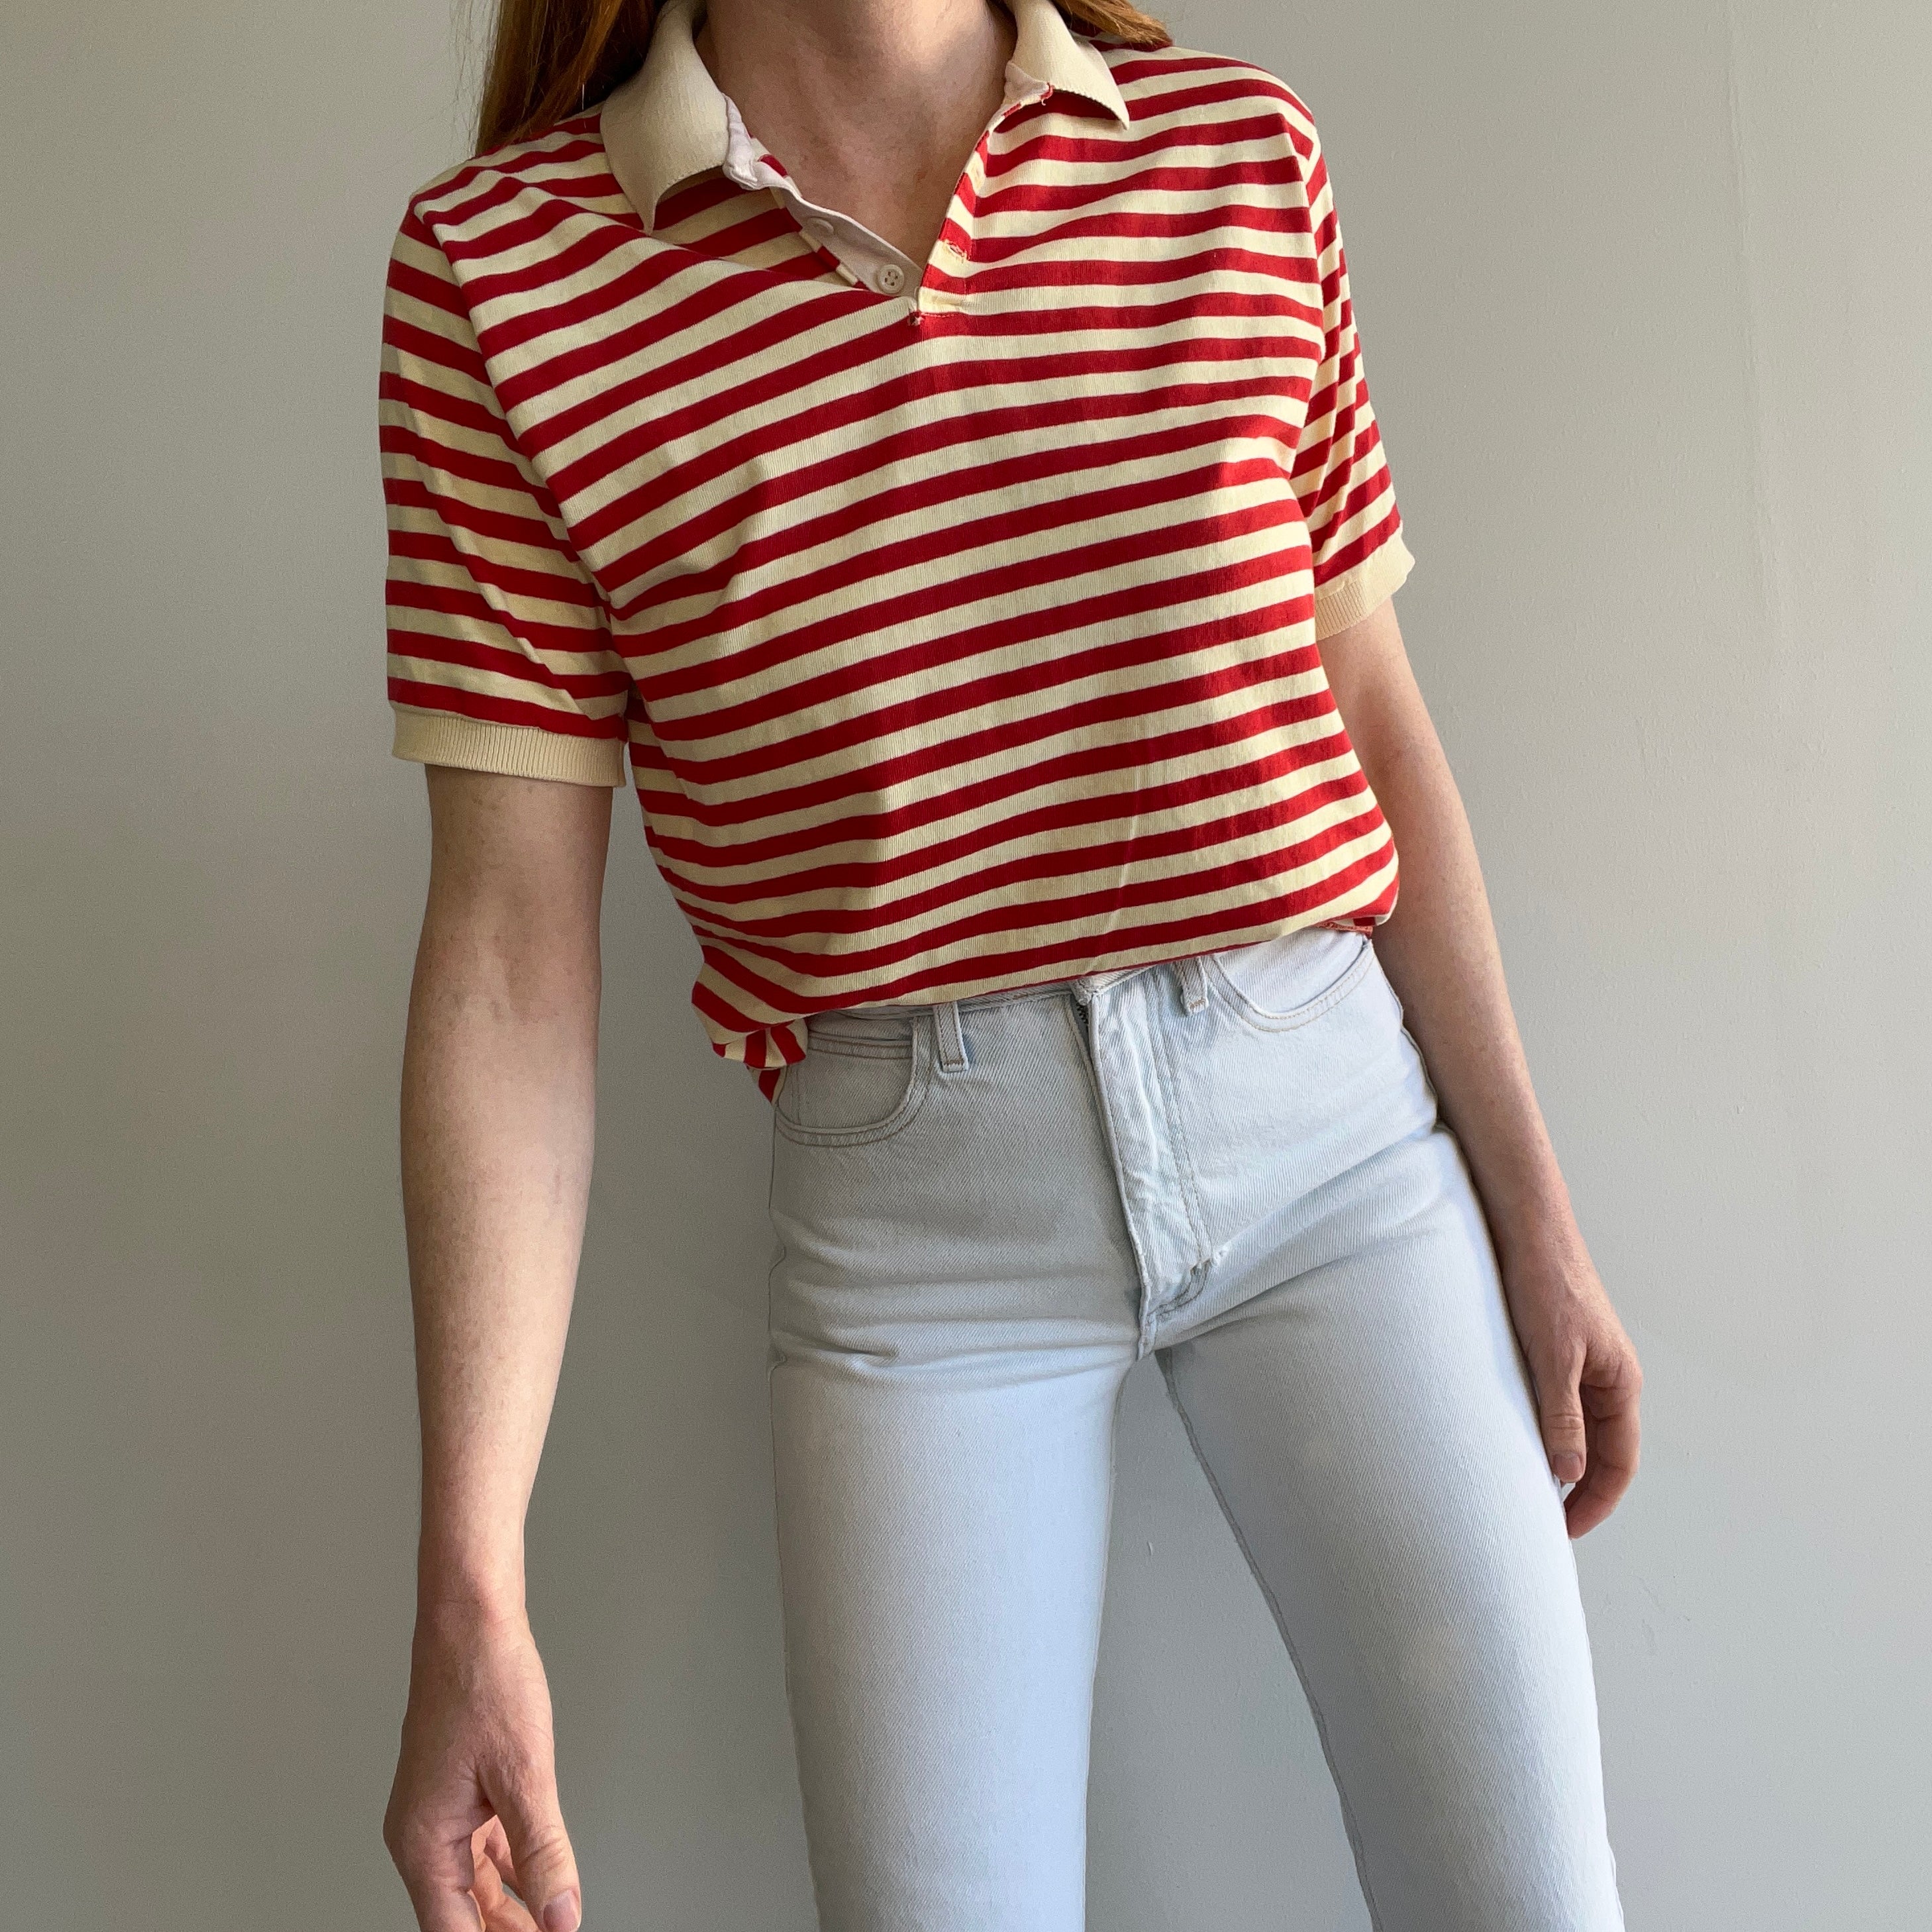 GG 1970s The Most Delightful Striped Polo Shirt